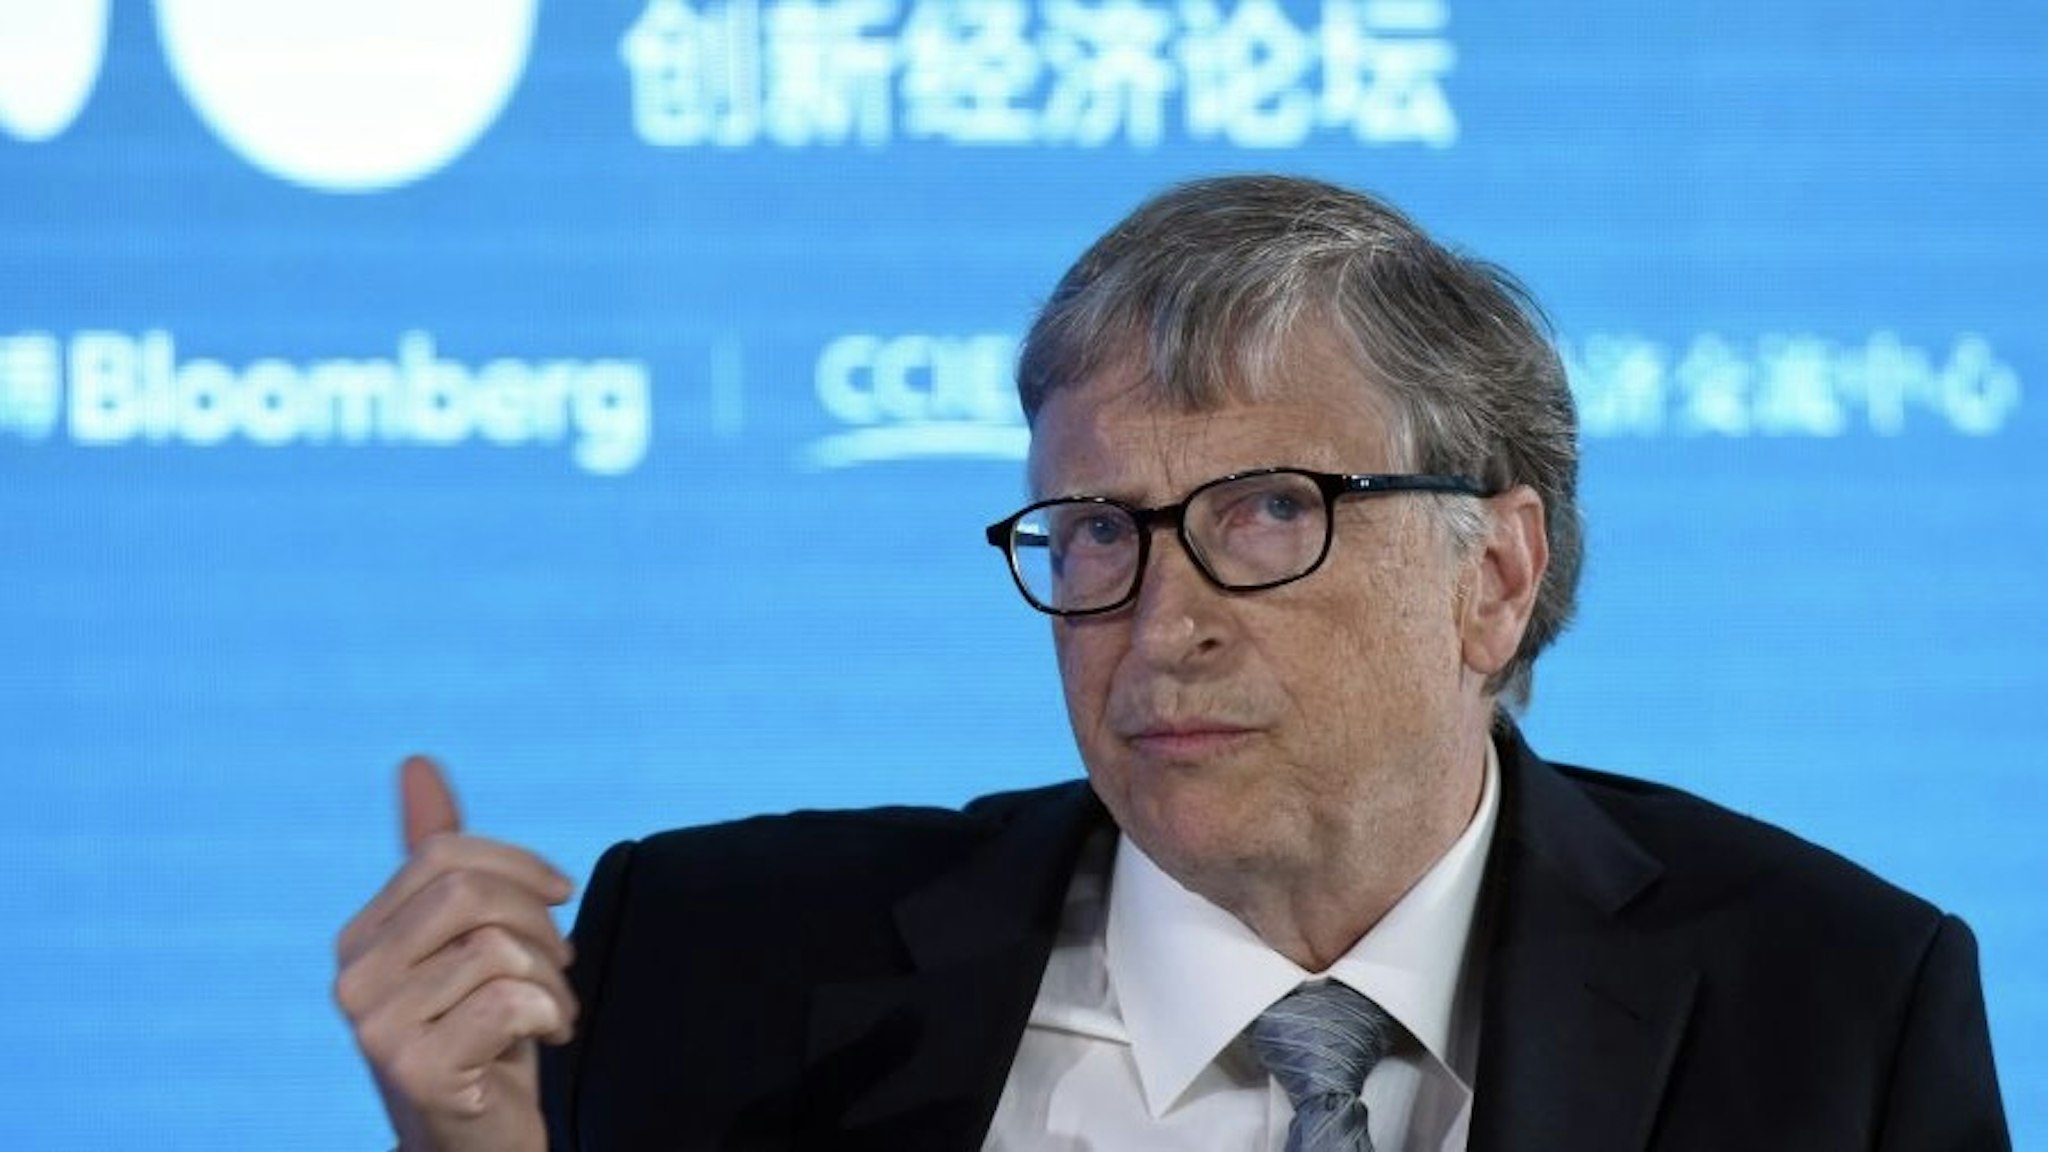 BEIJING, CHINA - NOVEMBER 21: Bill &amp; Melinda Gates Foundation Chairman Bill Gates speaks during 2019 New Economy Forum at China Center for International Economic Exchanges (CCIEE) on November 21, 2019 in Beijing, China. 2019 New Economy Forum themed on 'A new community for the new economy' is held on November 20-22 in Beijing. (Photo by Hou Yu/China News Service/VCG via Getty Images)